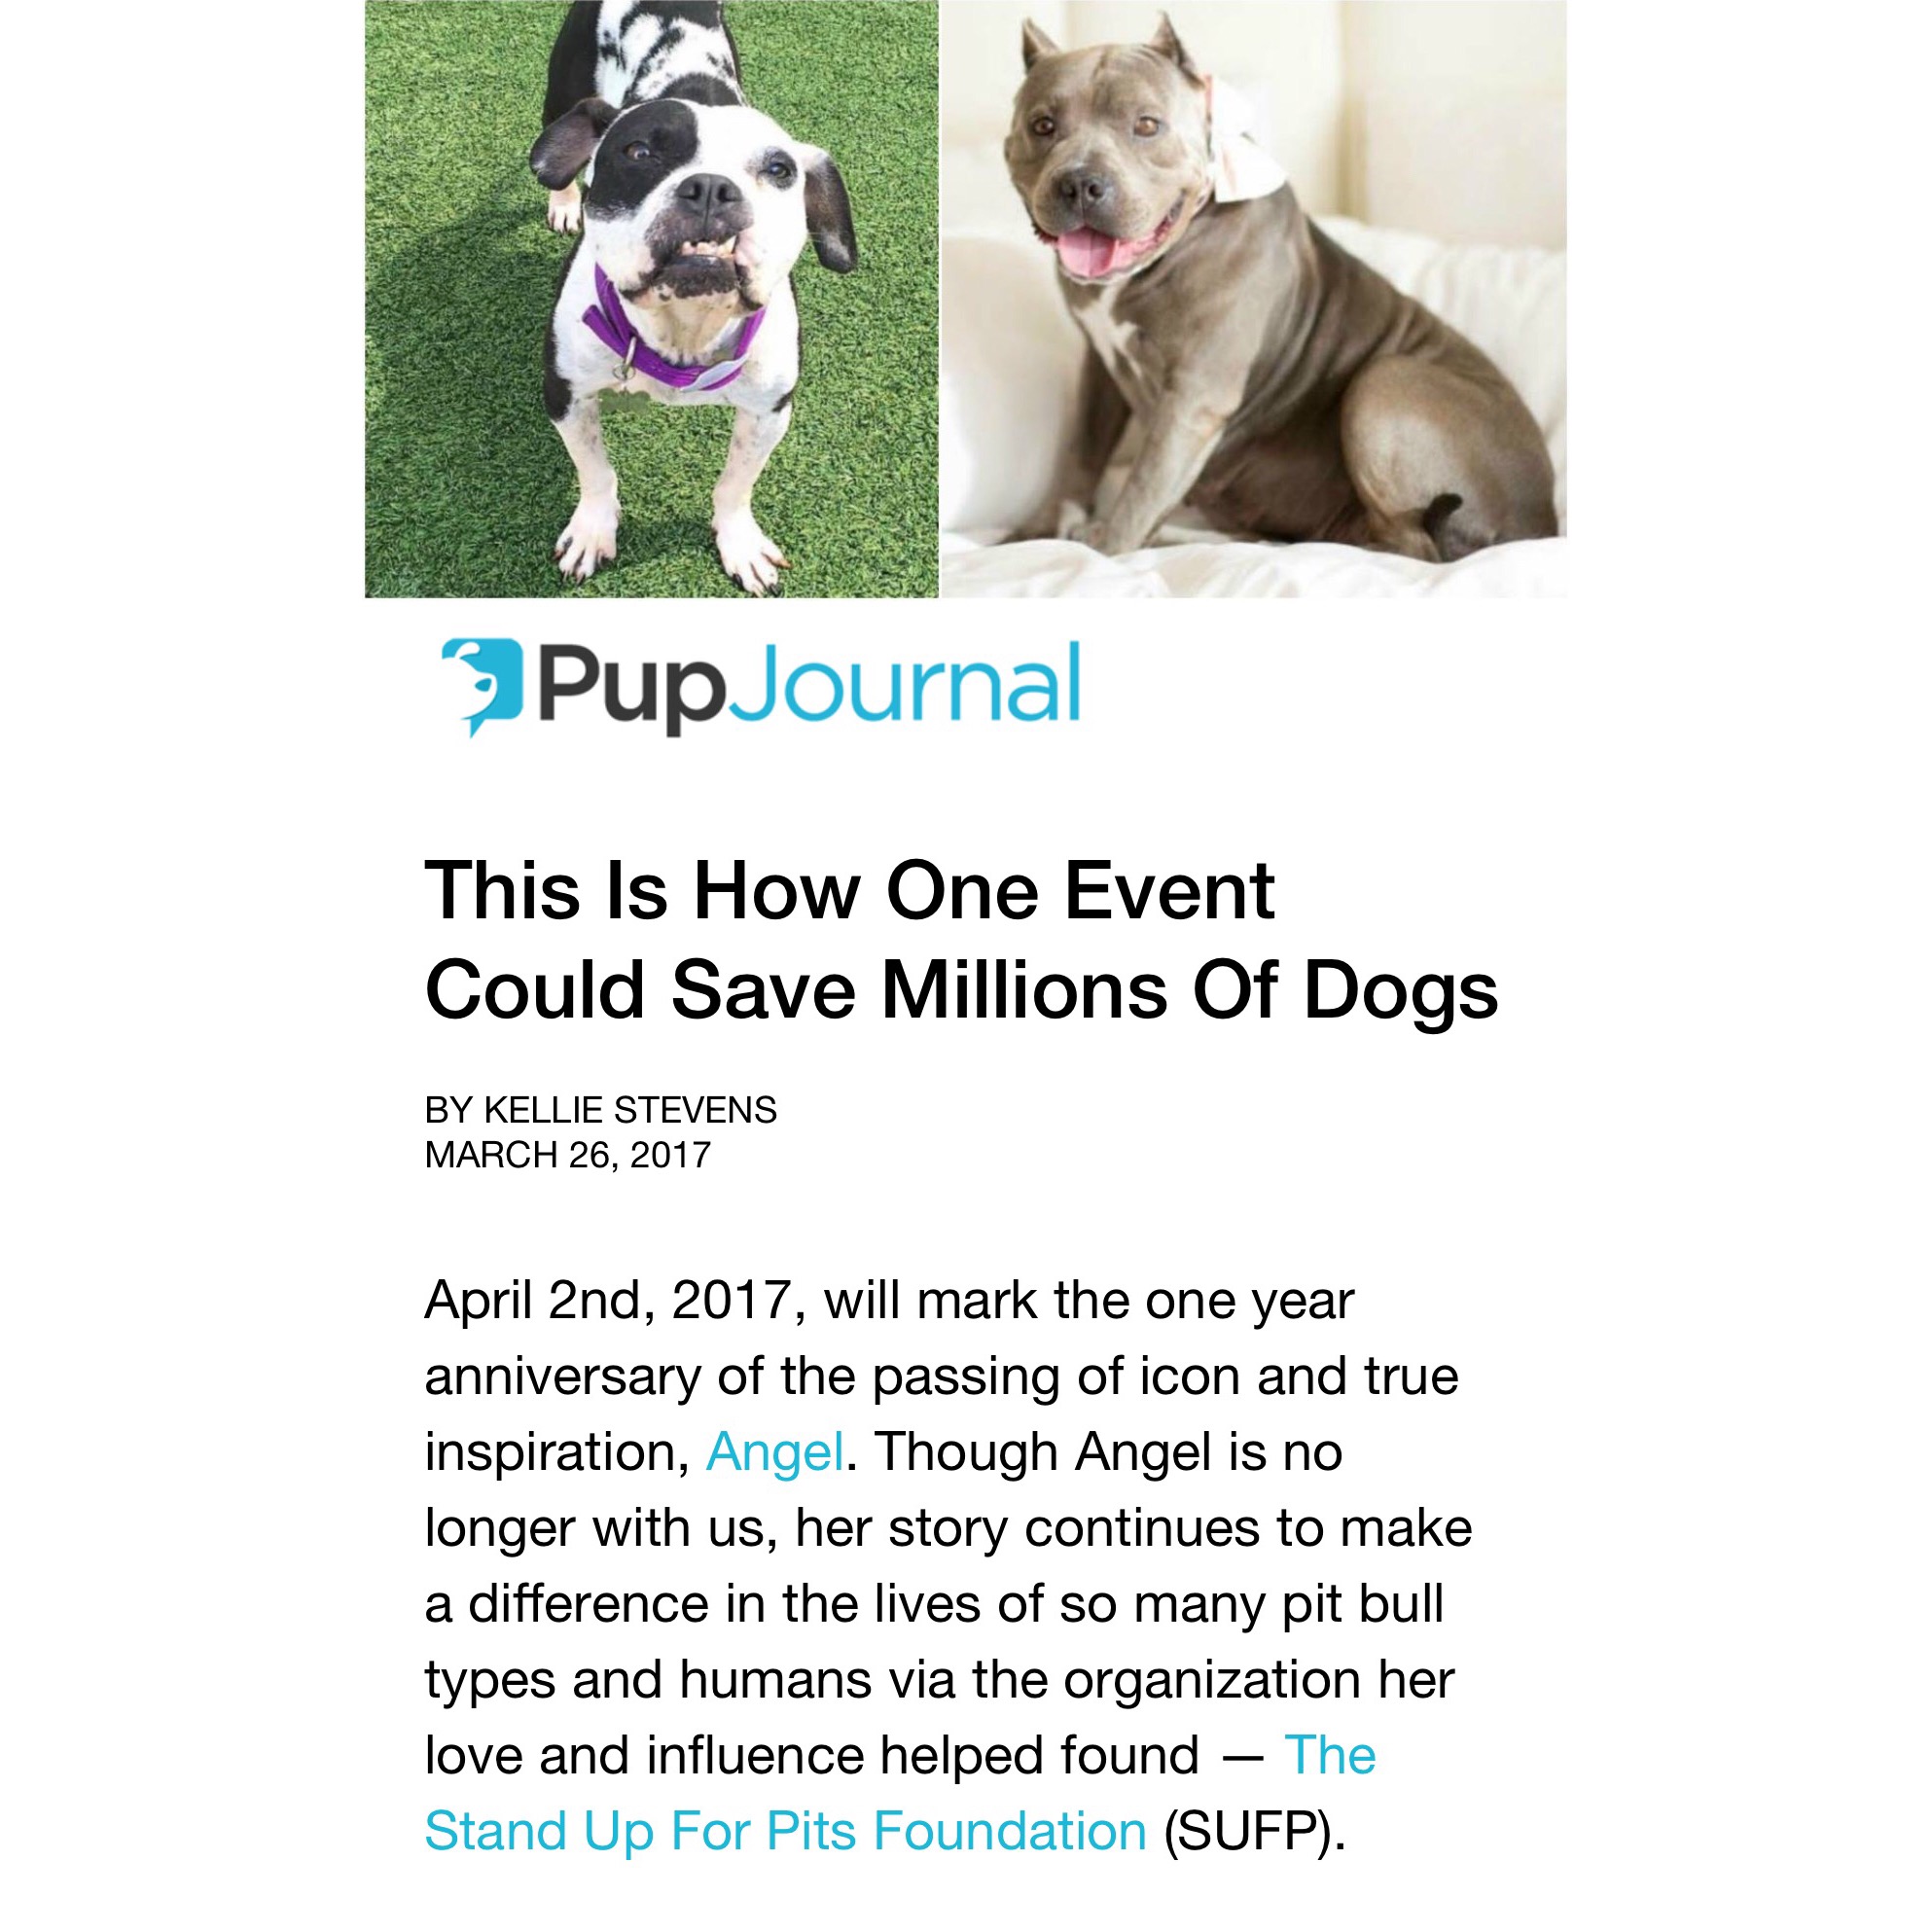 NEW Pup Journal piece on Spay/Neuter ANGEL Day! Read!